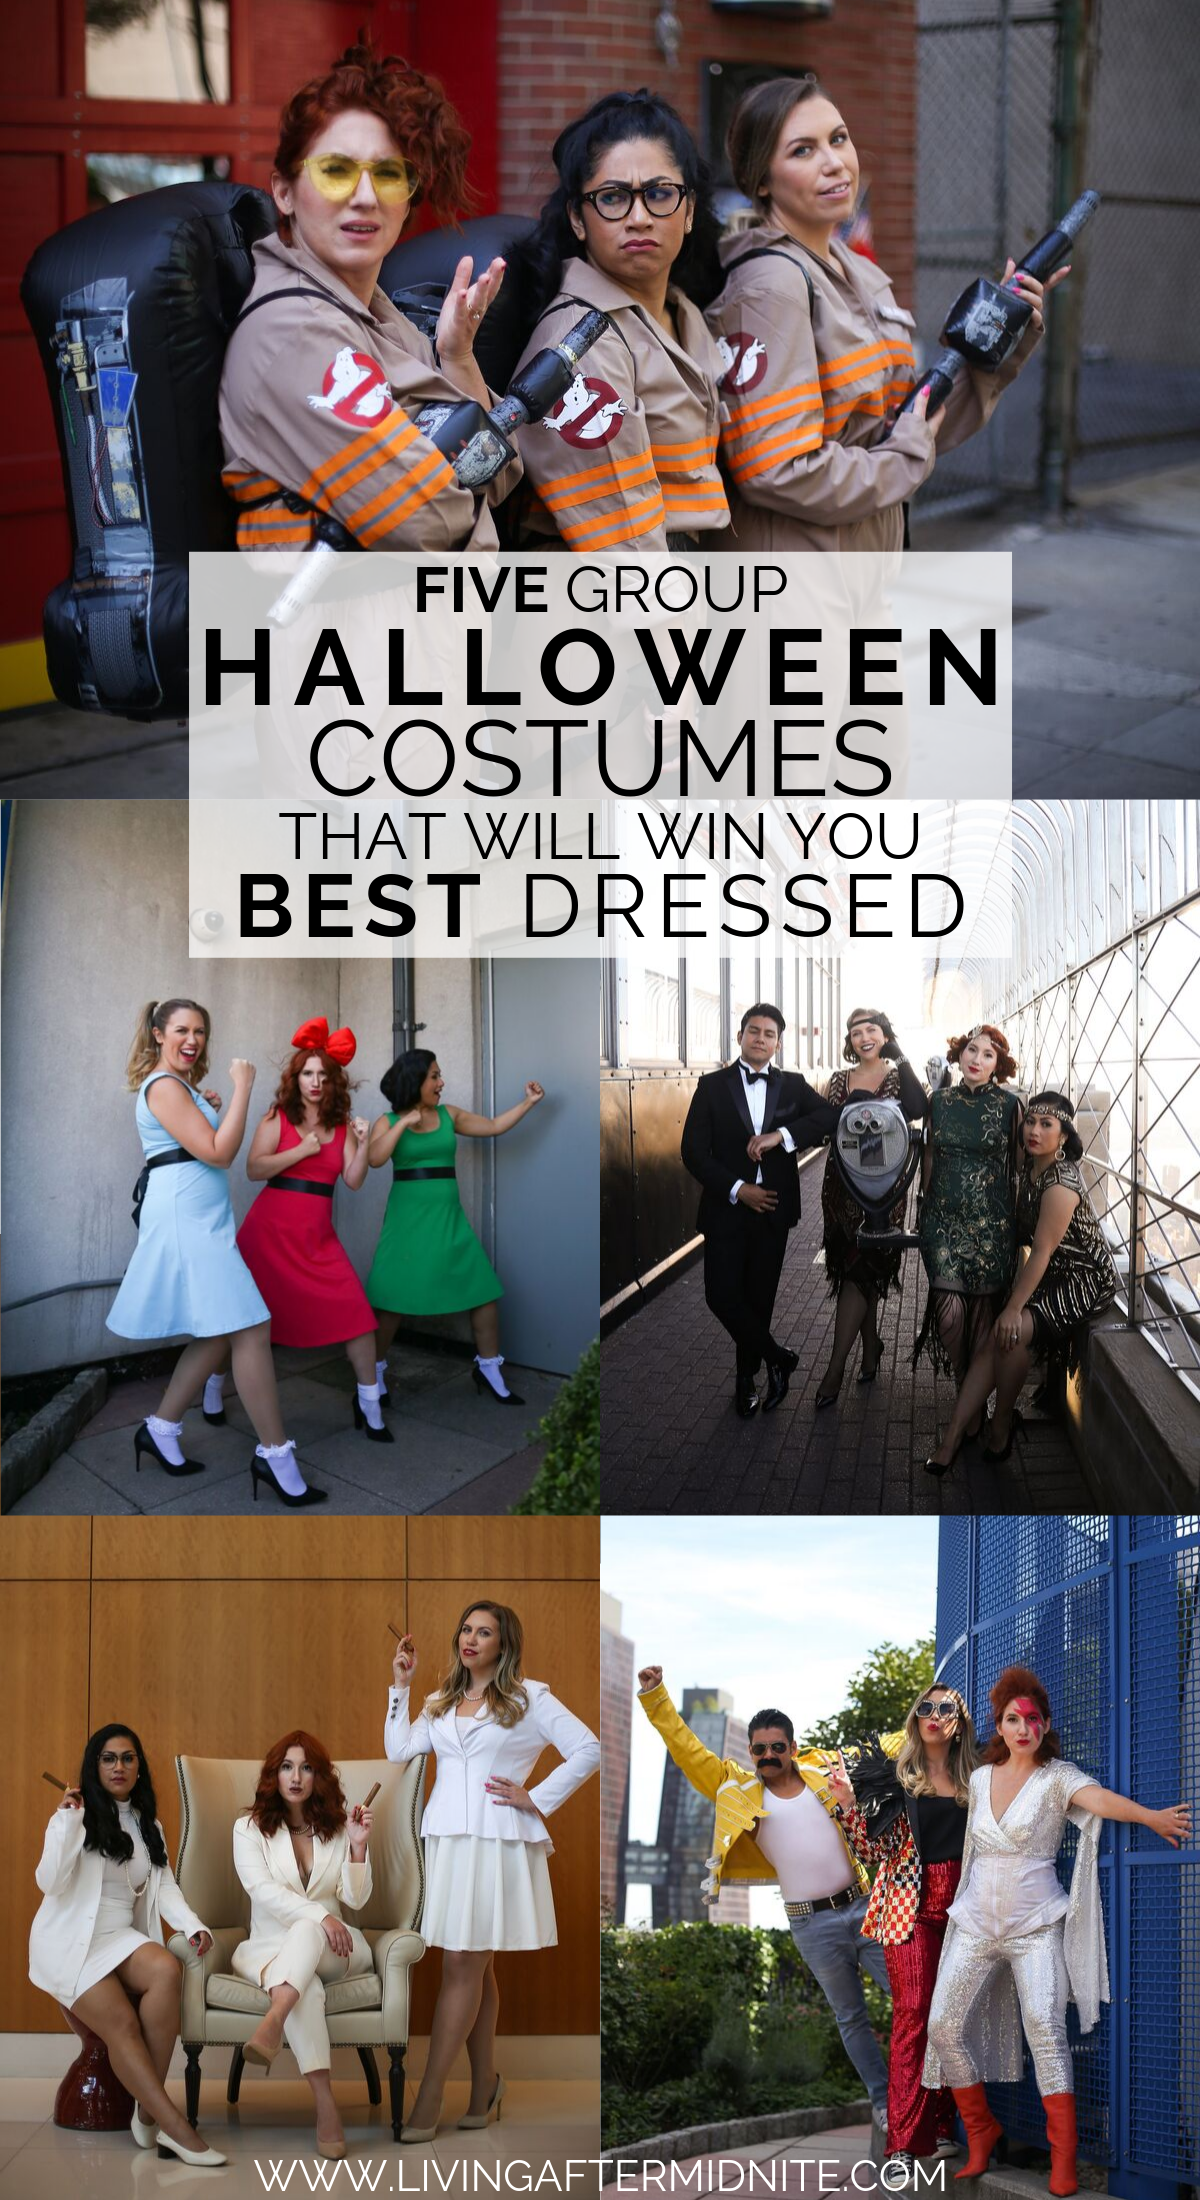 50 Cute Halloween Costumes For Teenage Girls That You'll Love  Halloween  costumes friends, Cool halloween costumes, Cute group halloween costumes